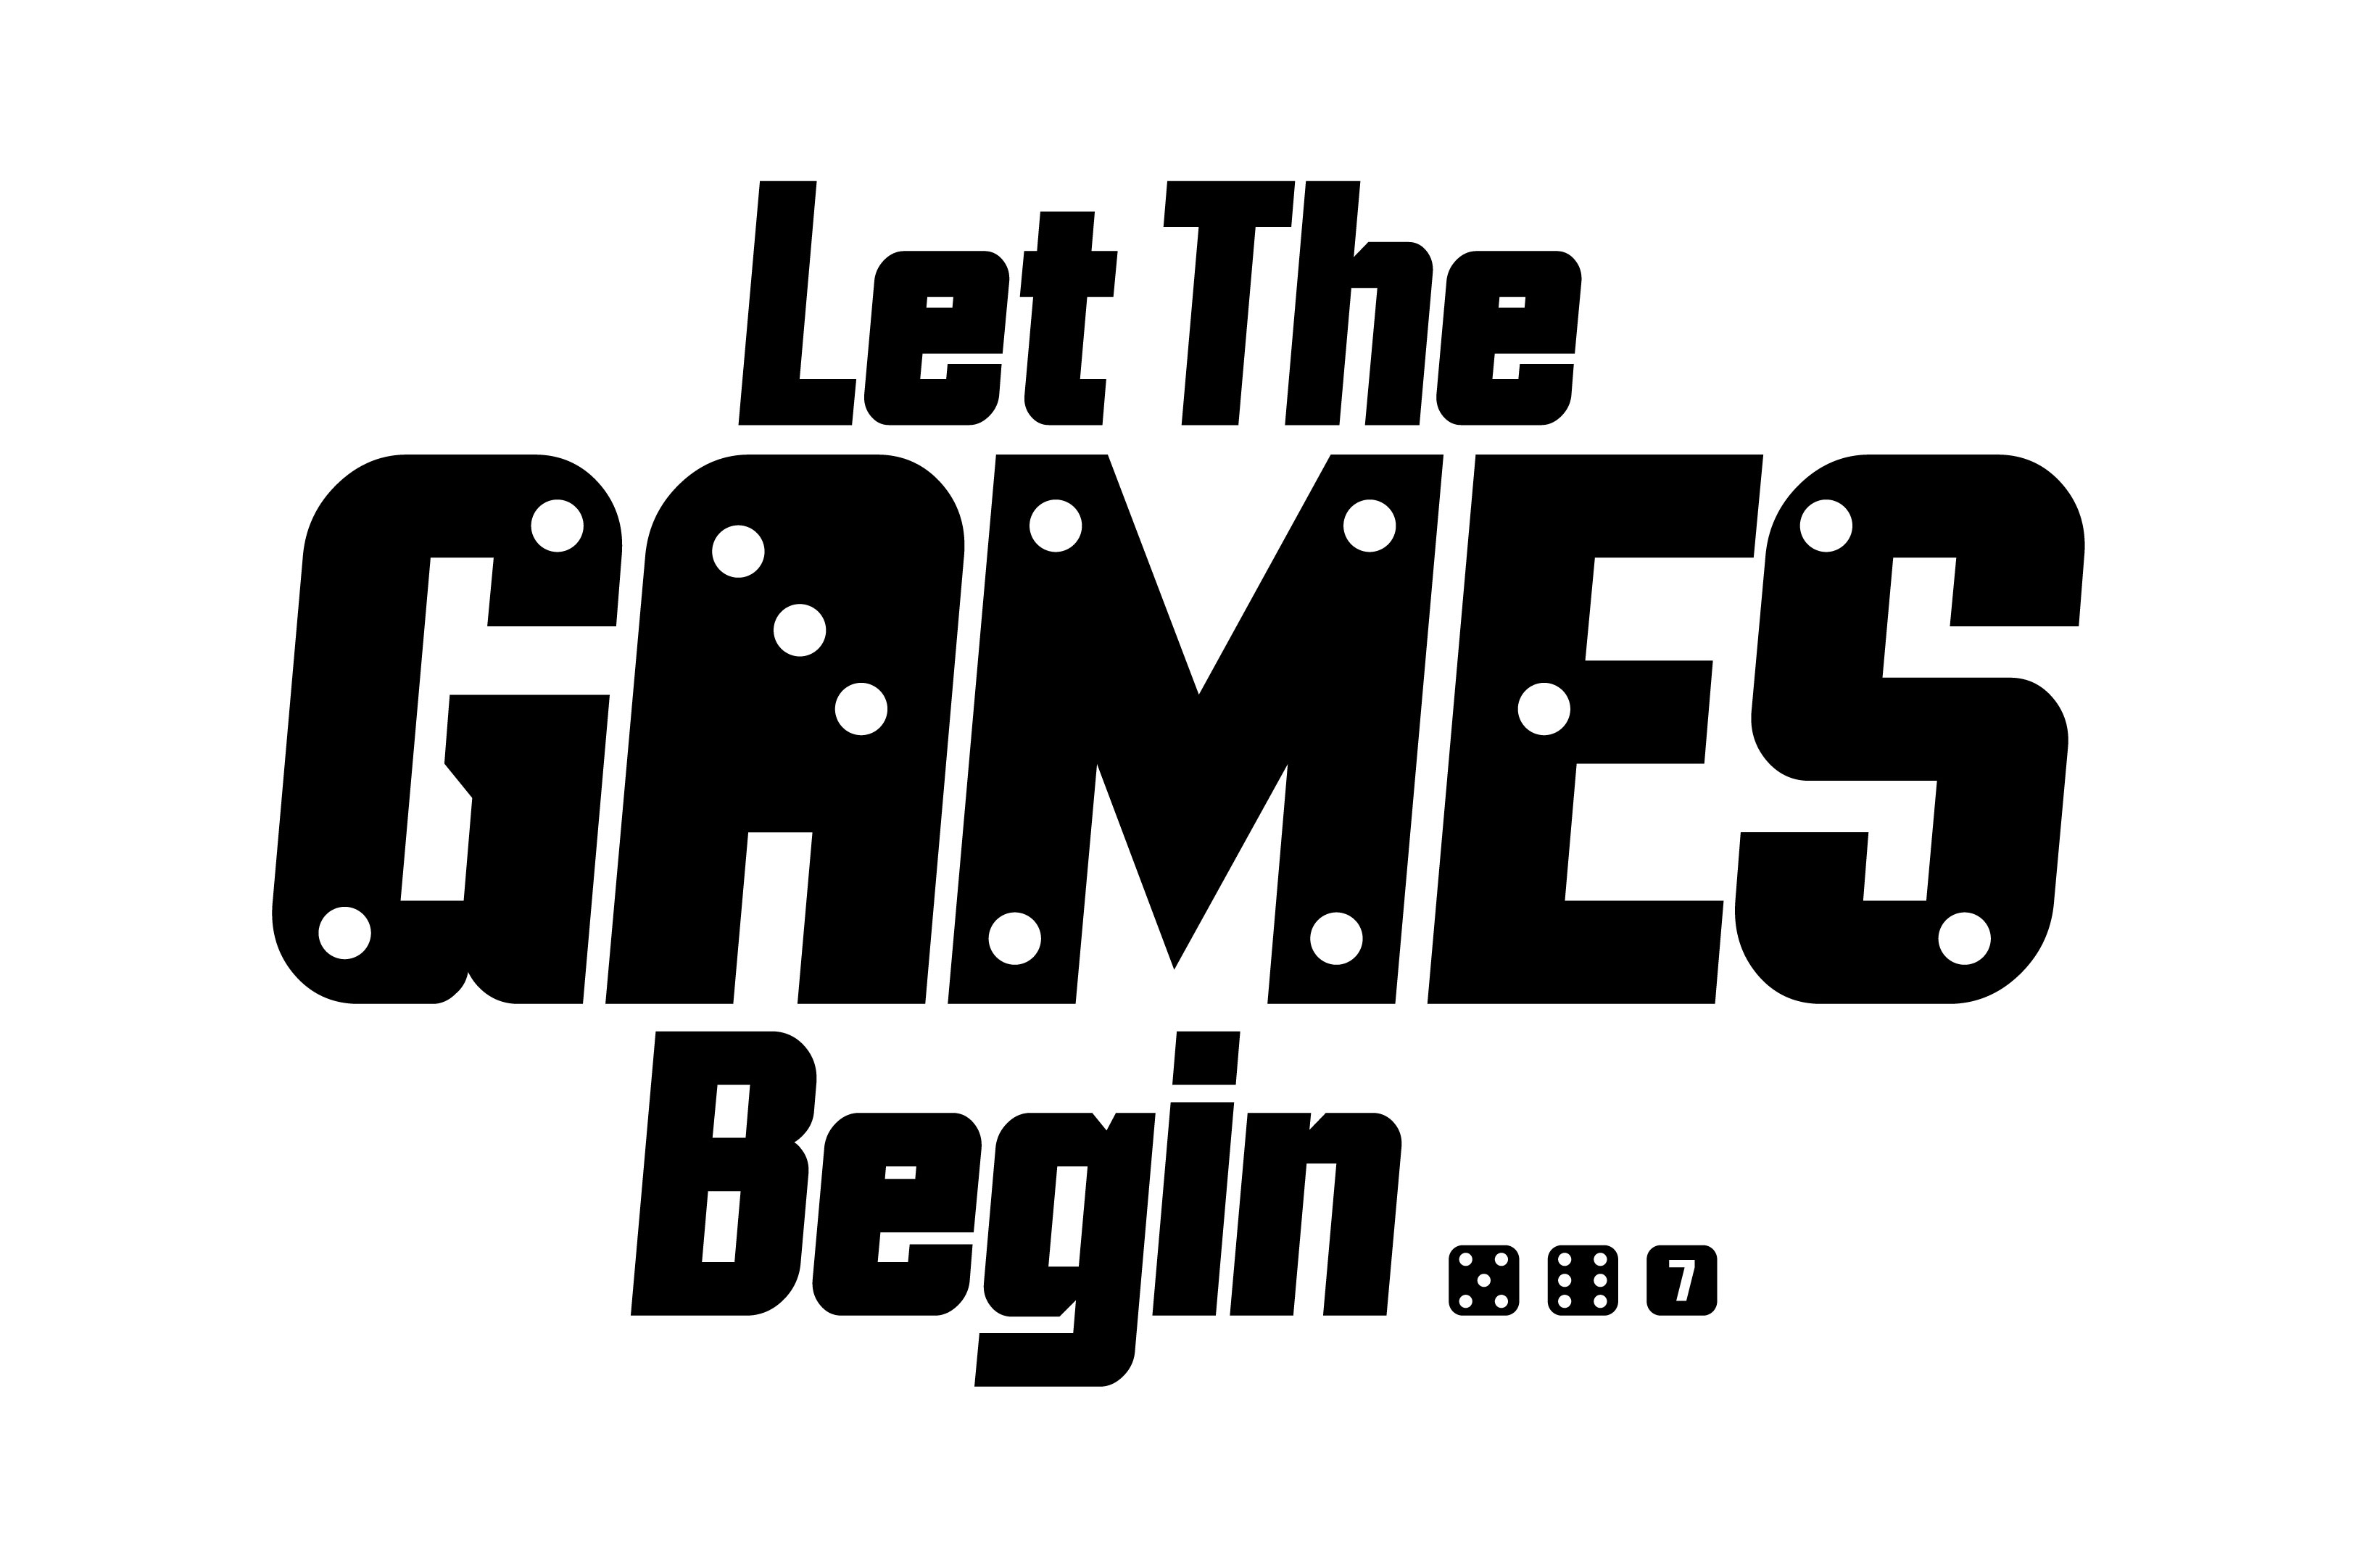 Let the the games begin stock illustration. Illustration of abstract -  156472458